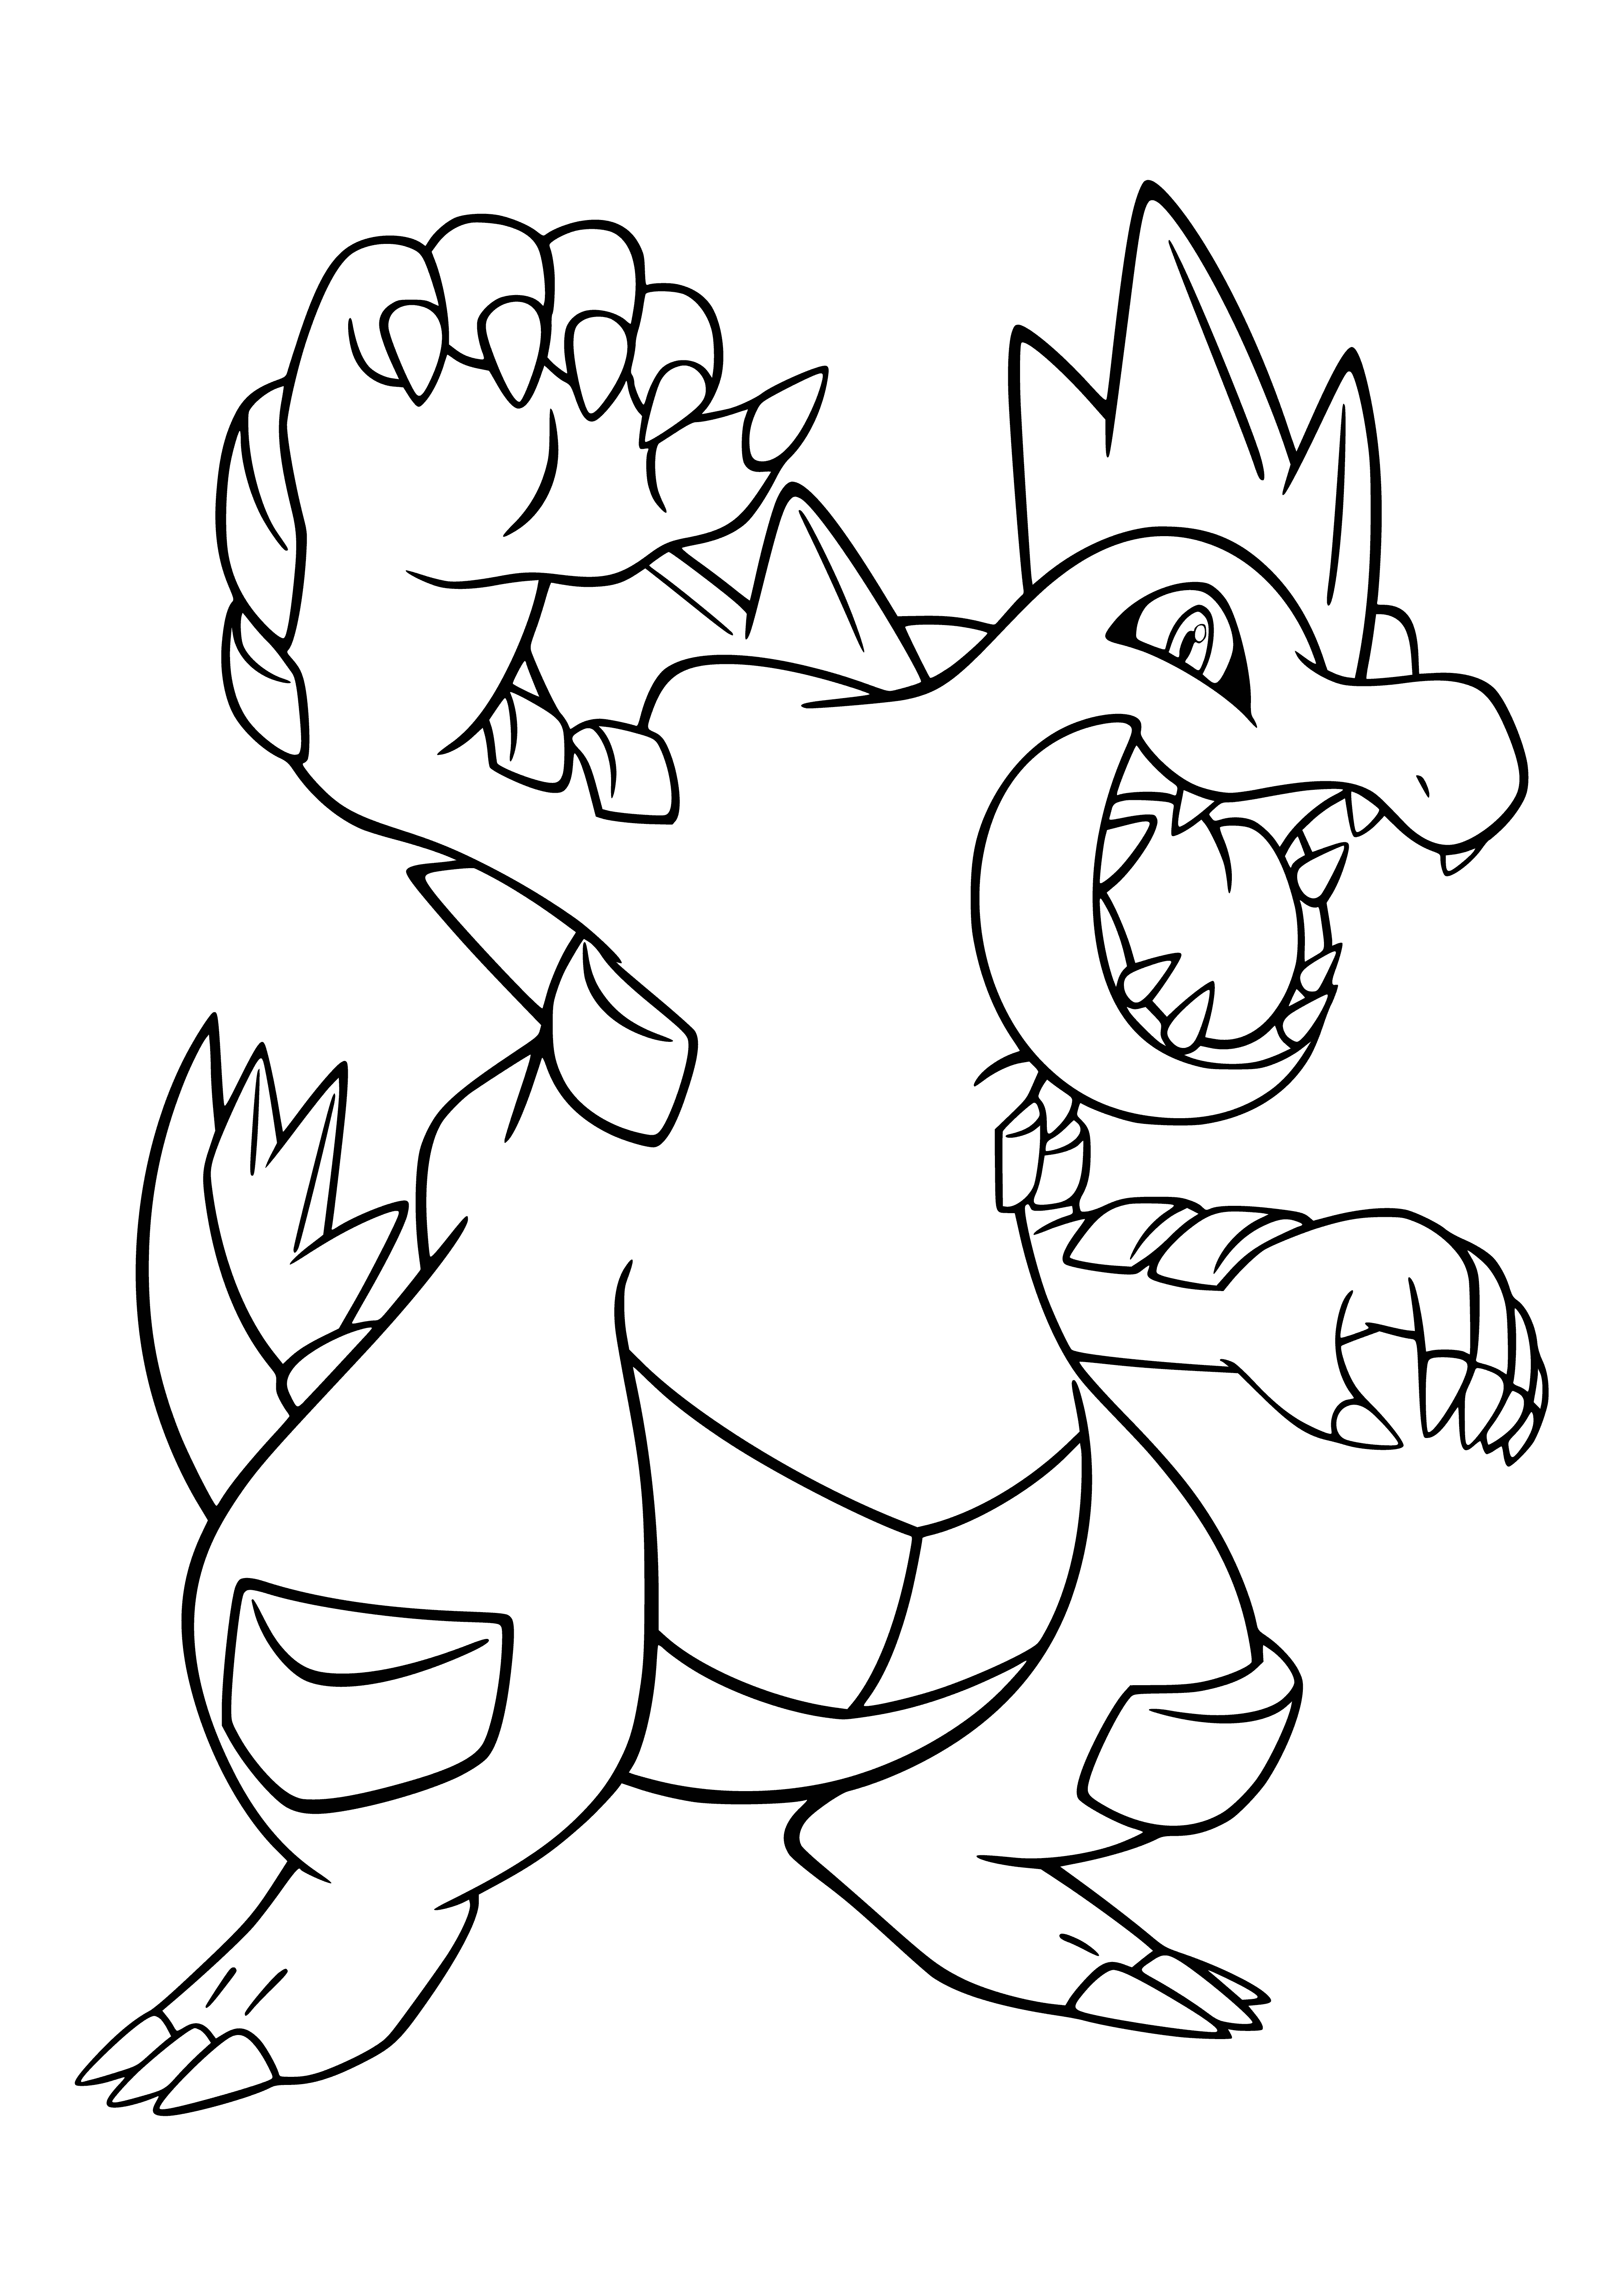 coloring page: Large blue Pokémon w/ red eyes, sharp teeth & claws, long tail w/ brown tip.